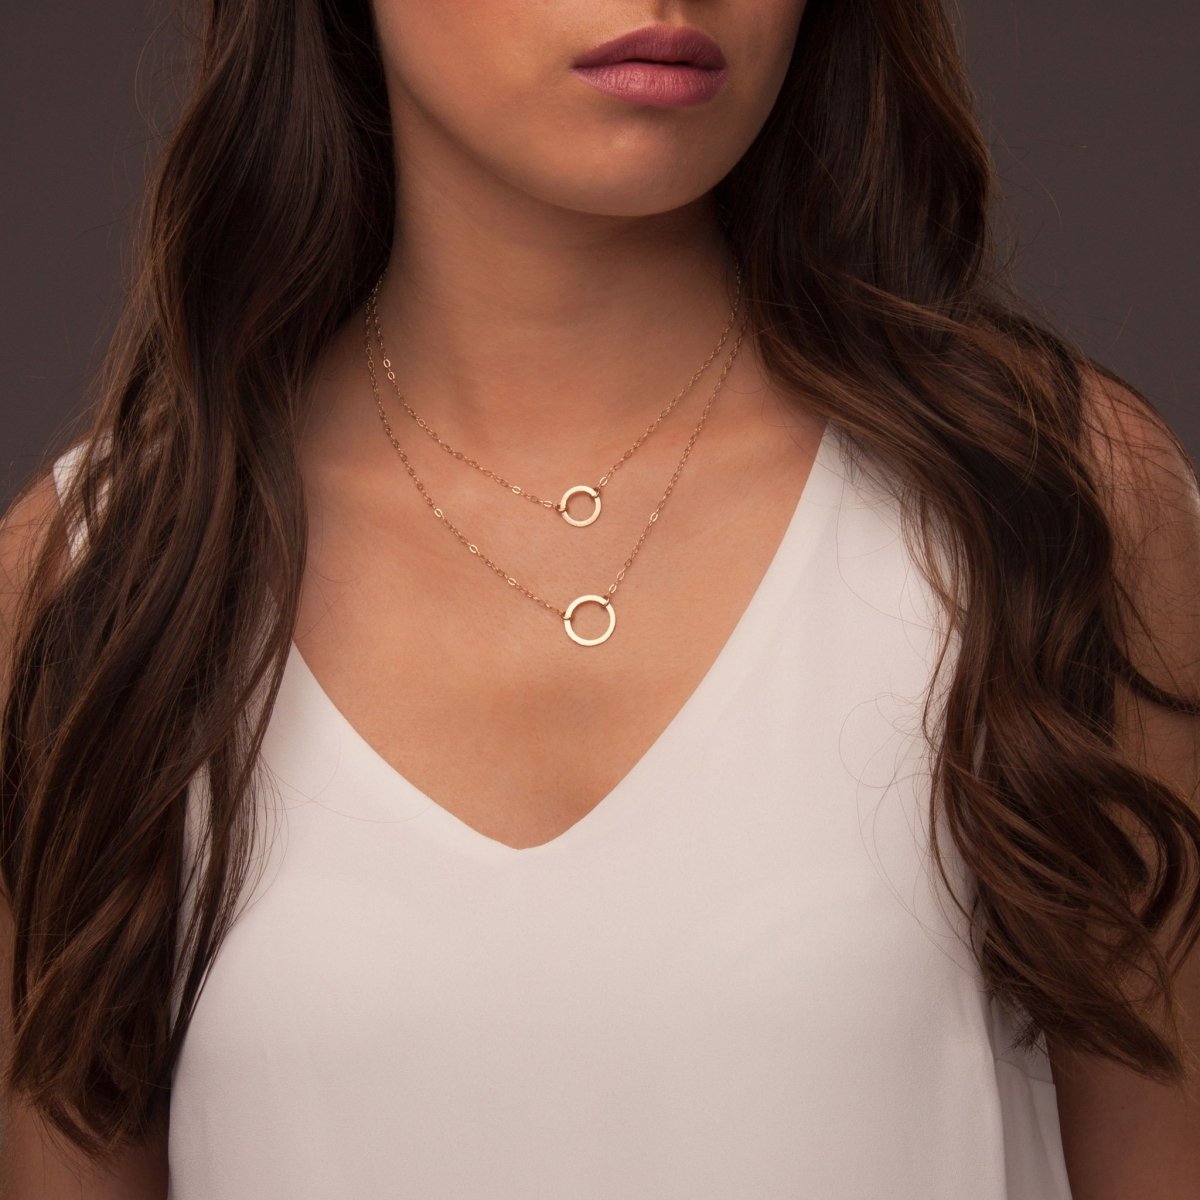 Layered Initial Necklaces for Women, 18K Gold Plated Paperclip Chain  Necklace Simple Cute Letter Pendant Initial Choker Necklace Gold Layered  Necklaces for Women Teen Girl - Walmart.com